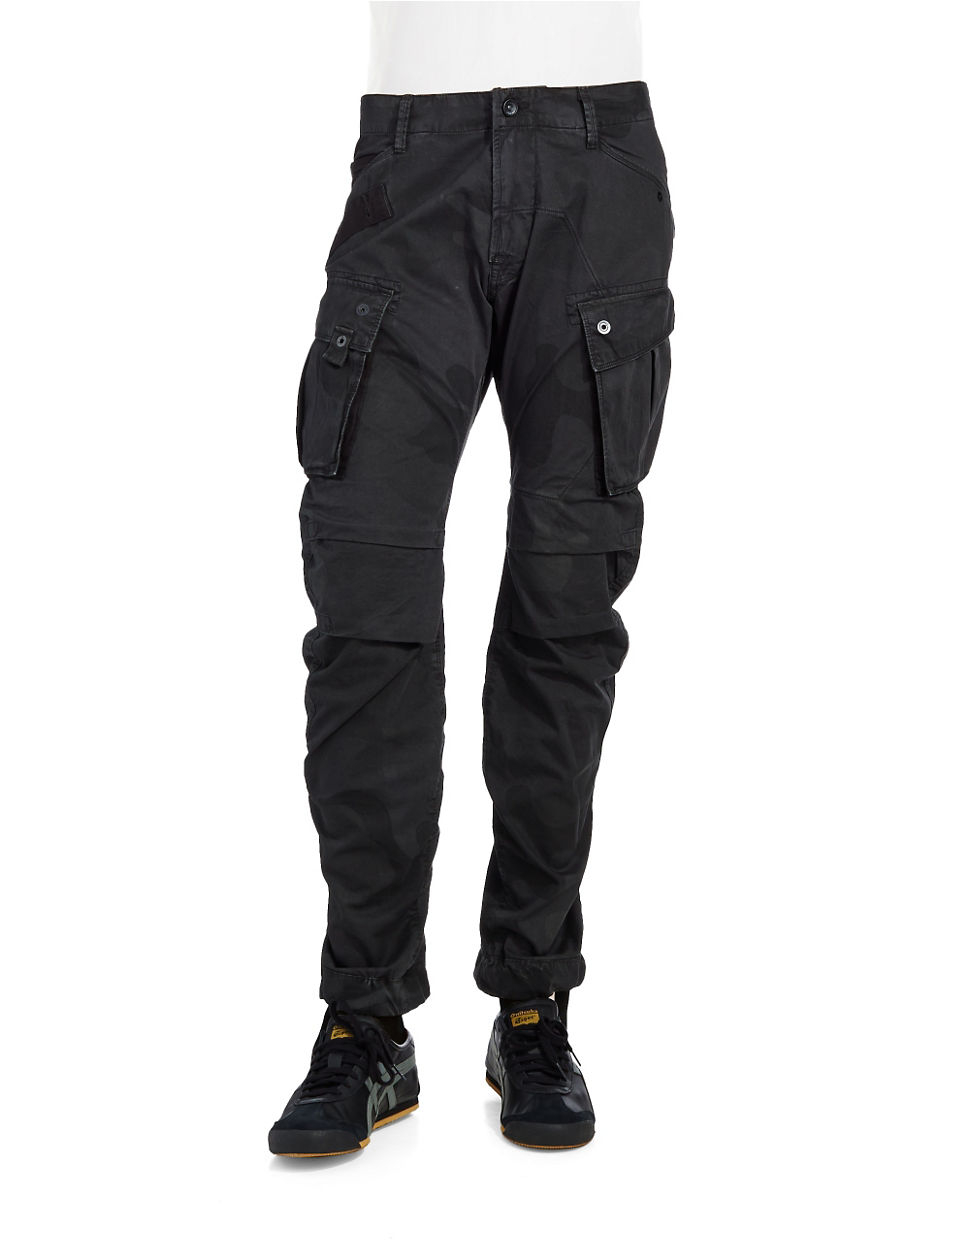 G-Star RAW Camouflage Cargo Pants in Black for Men - Lyst